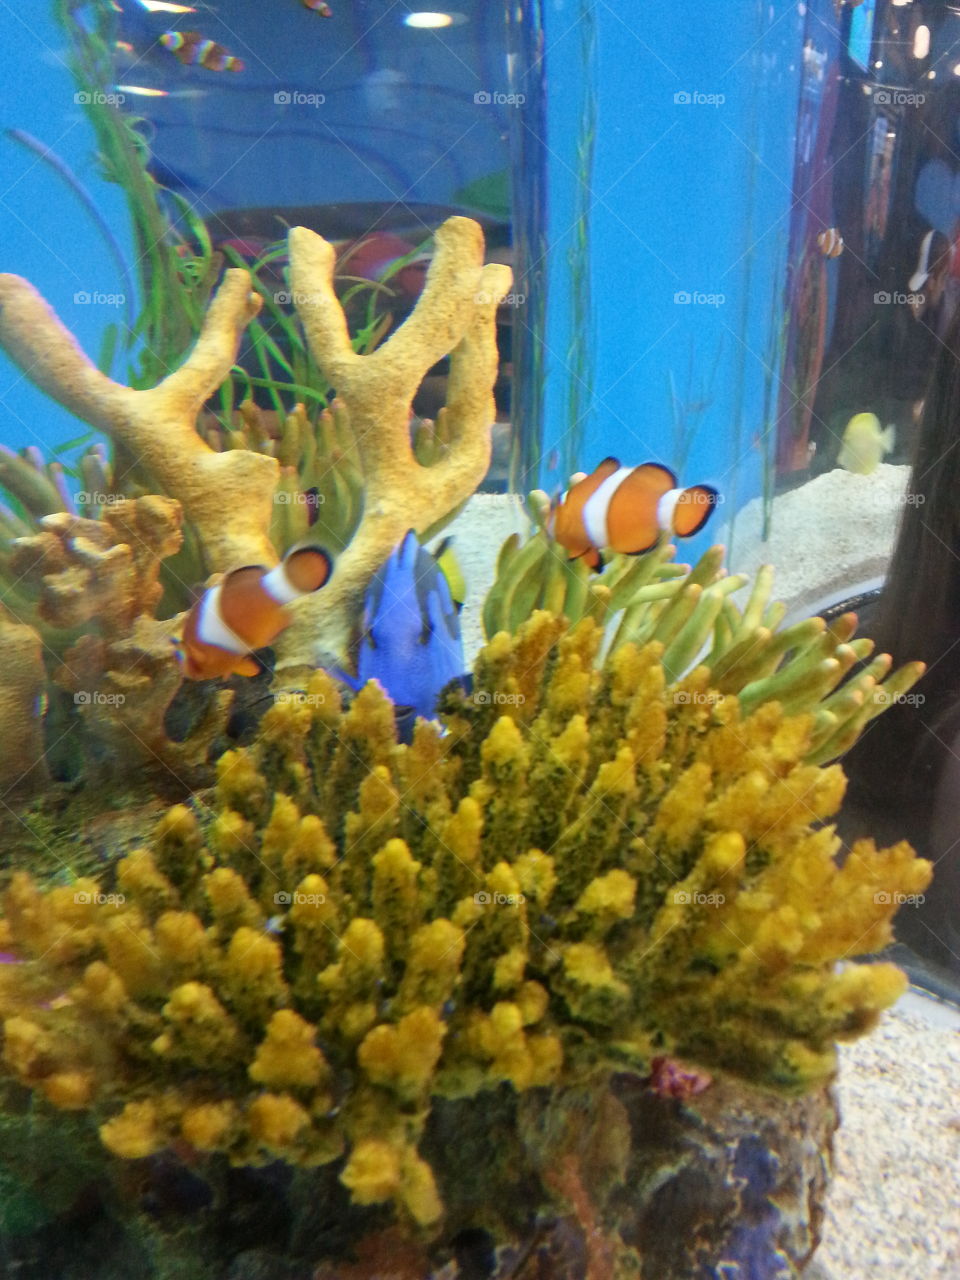 saw some recognizable fish at the Ripley's Aquarium. Is it Dory and Nemo?